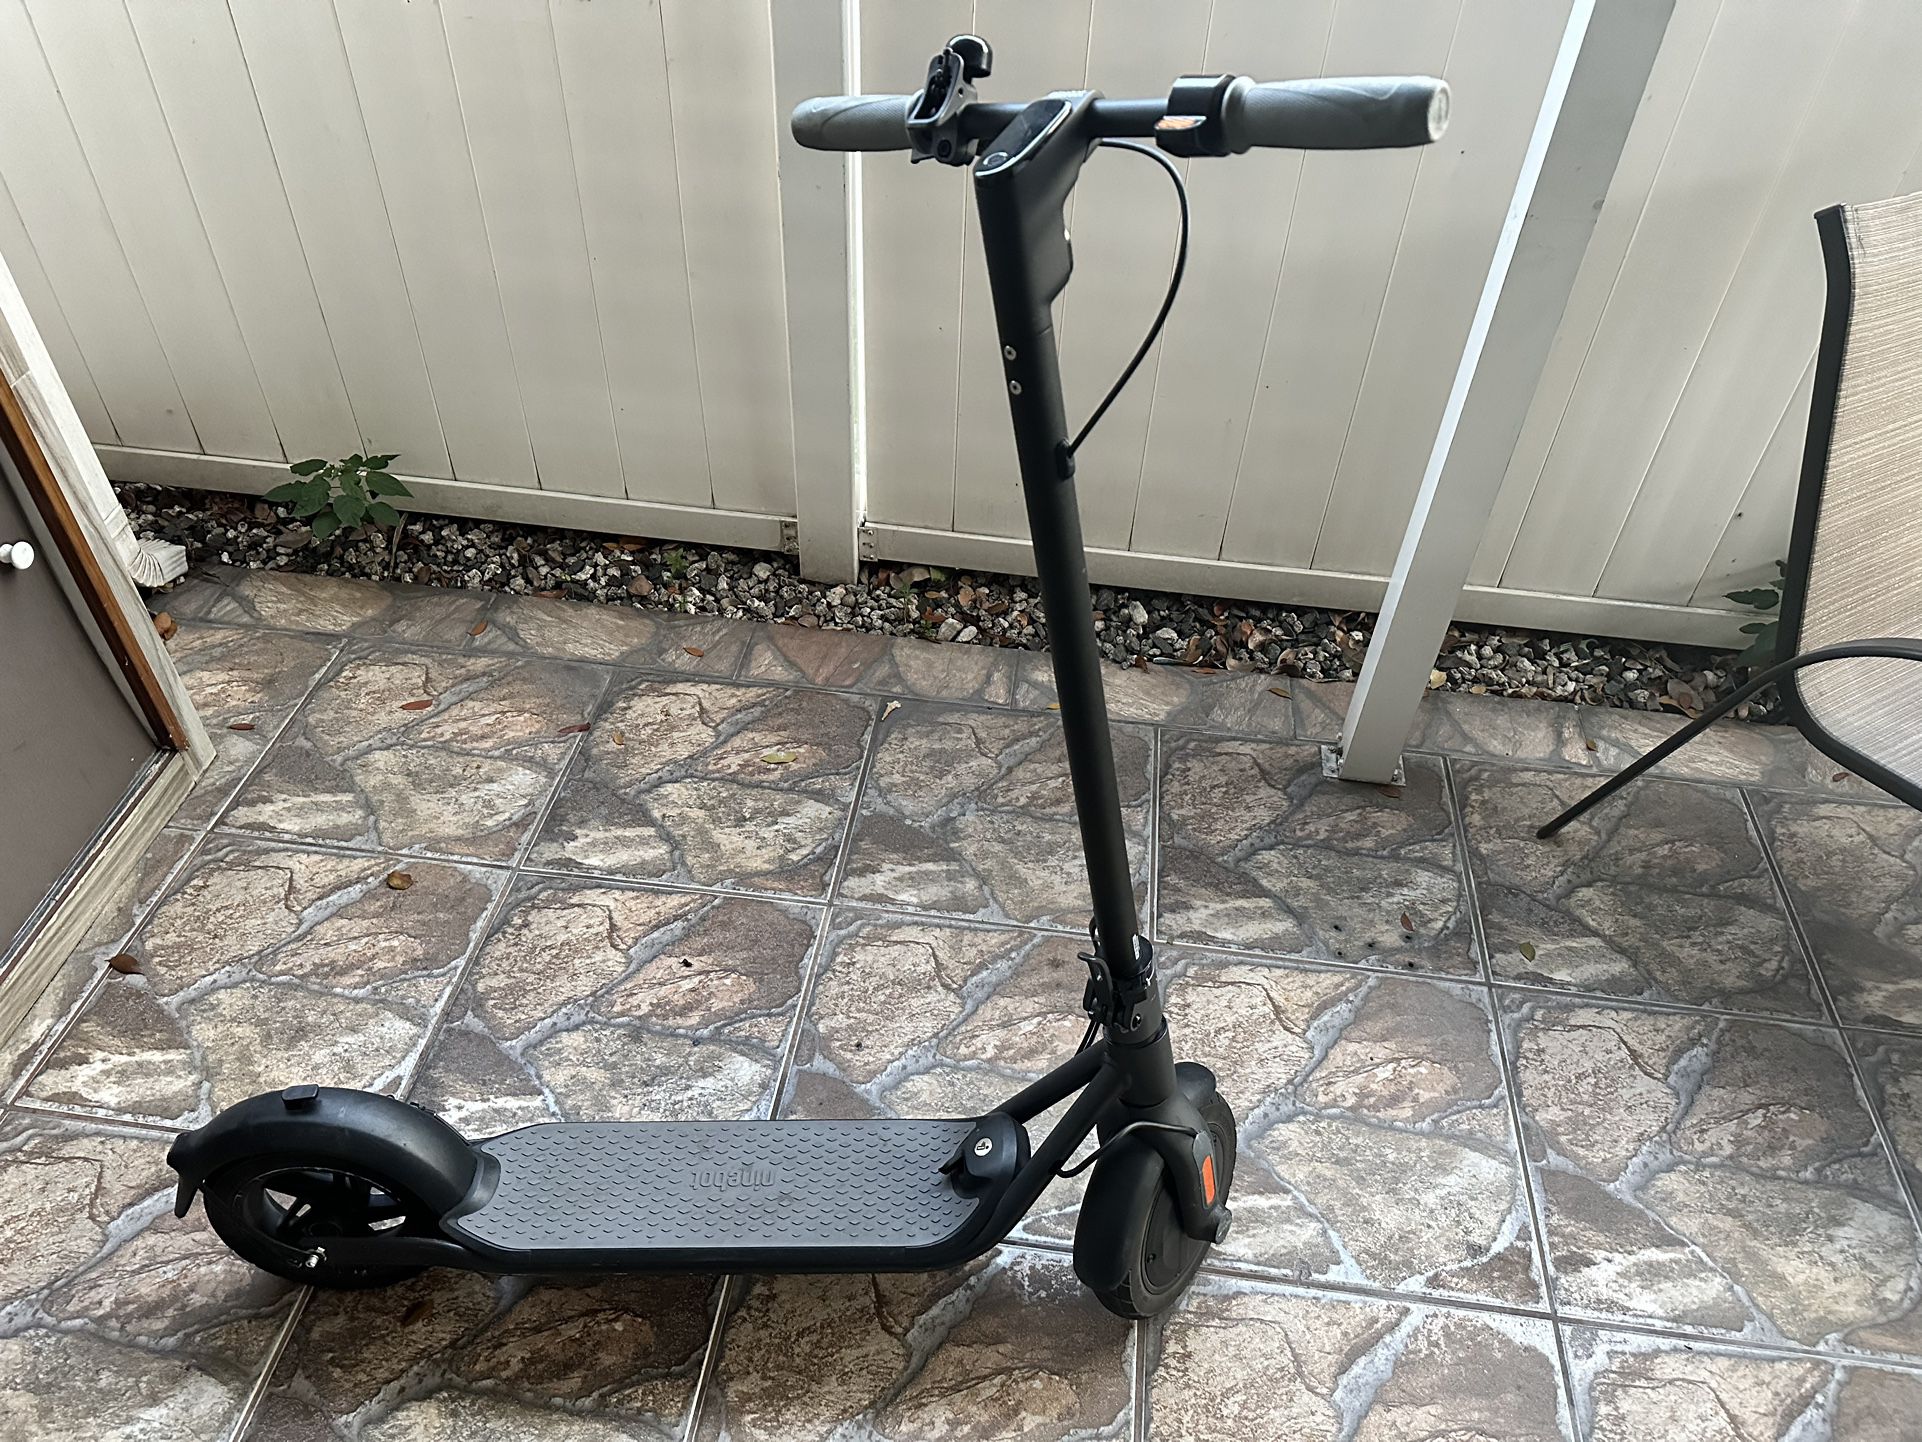 Gegway Ninebot F25 Electric Kick Scooter